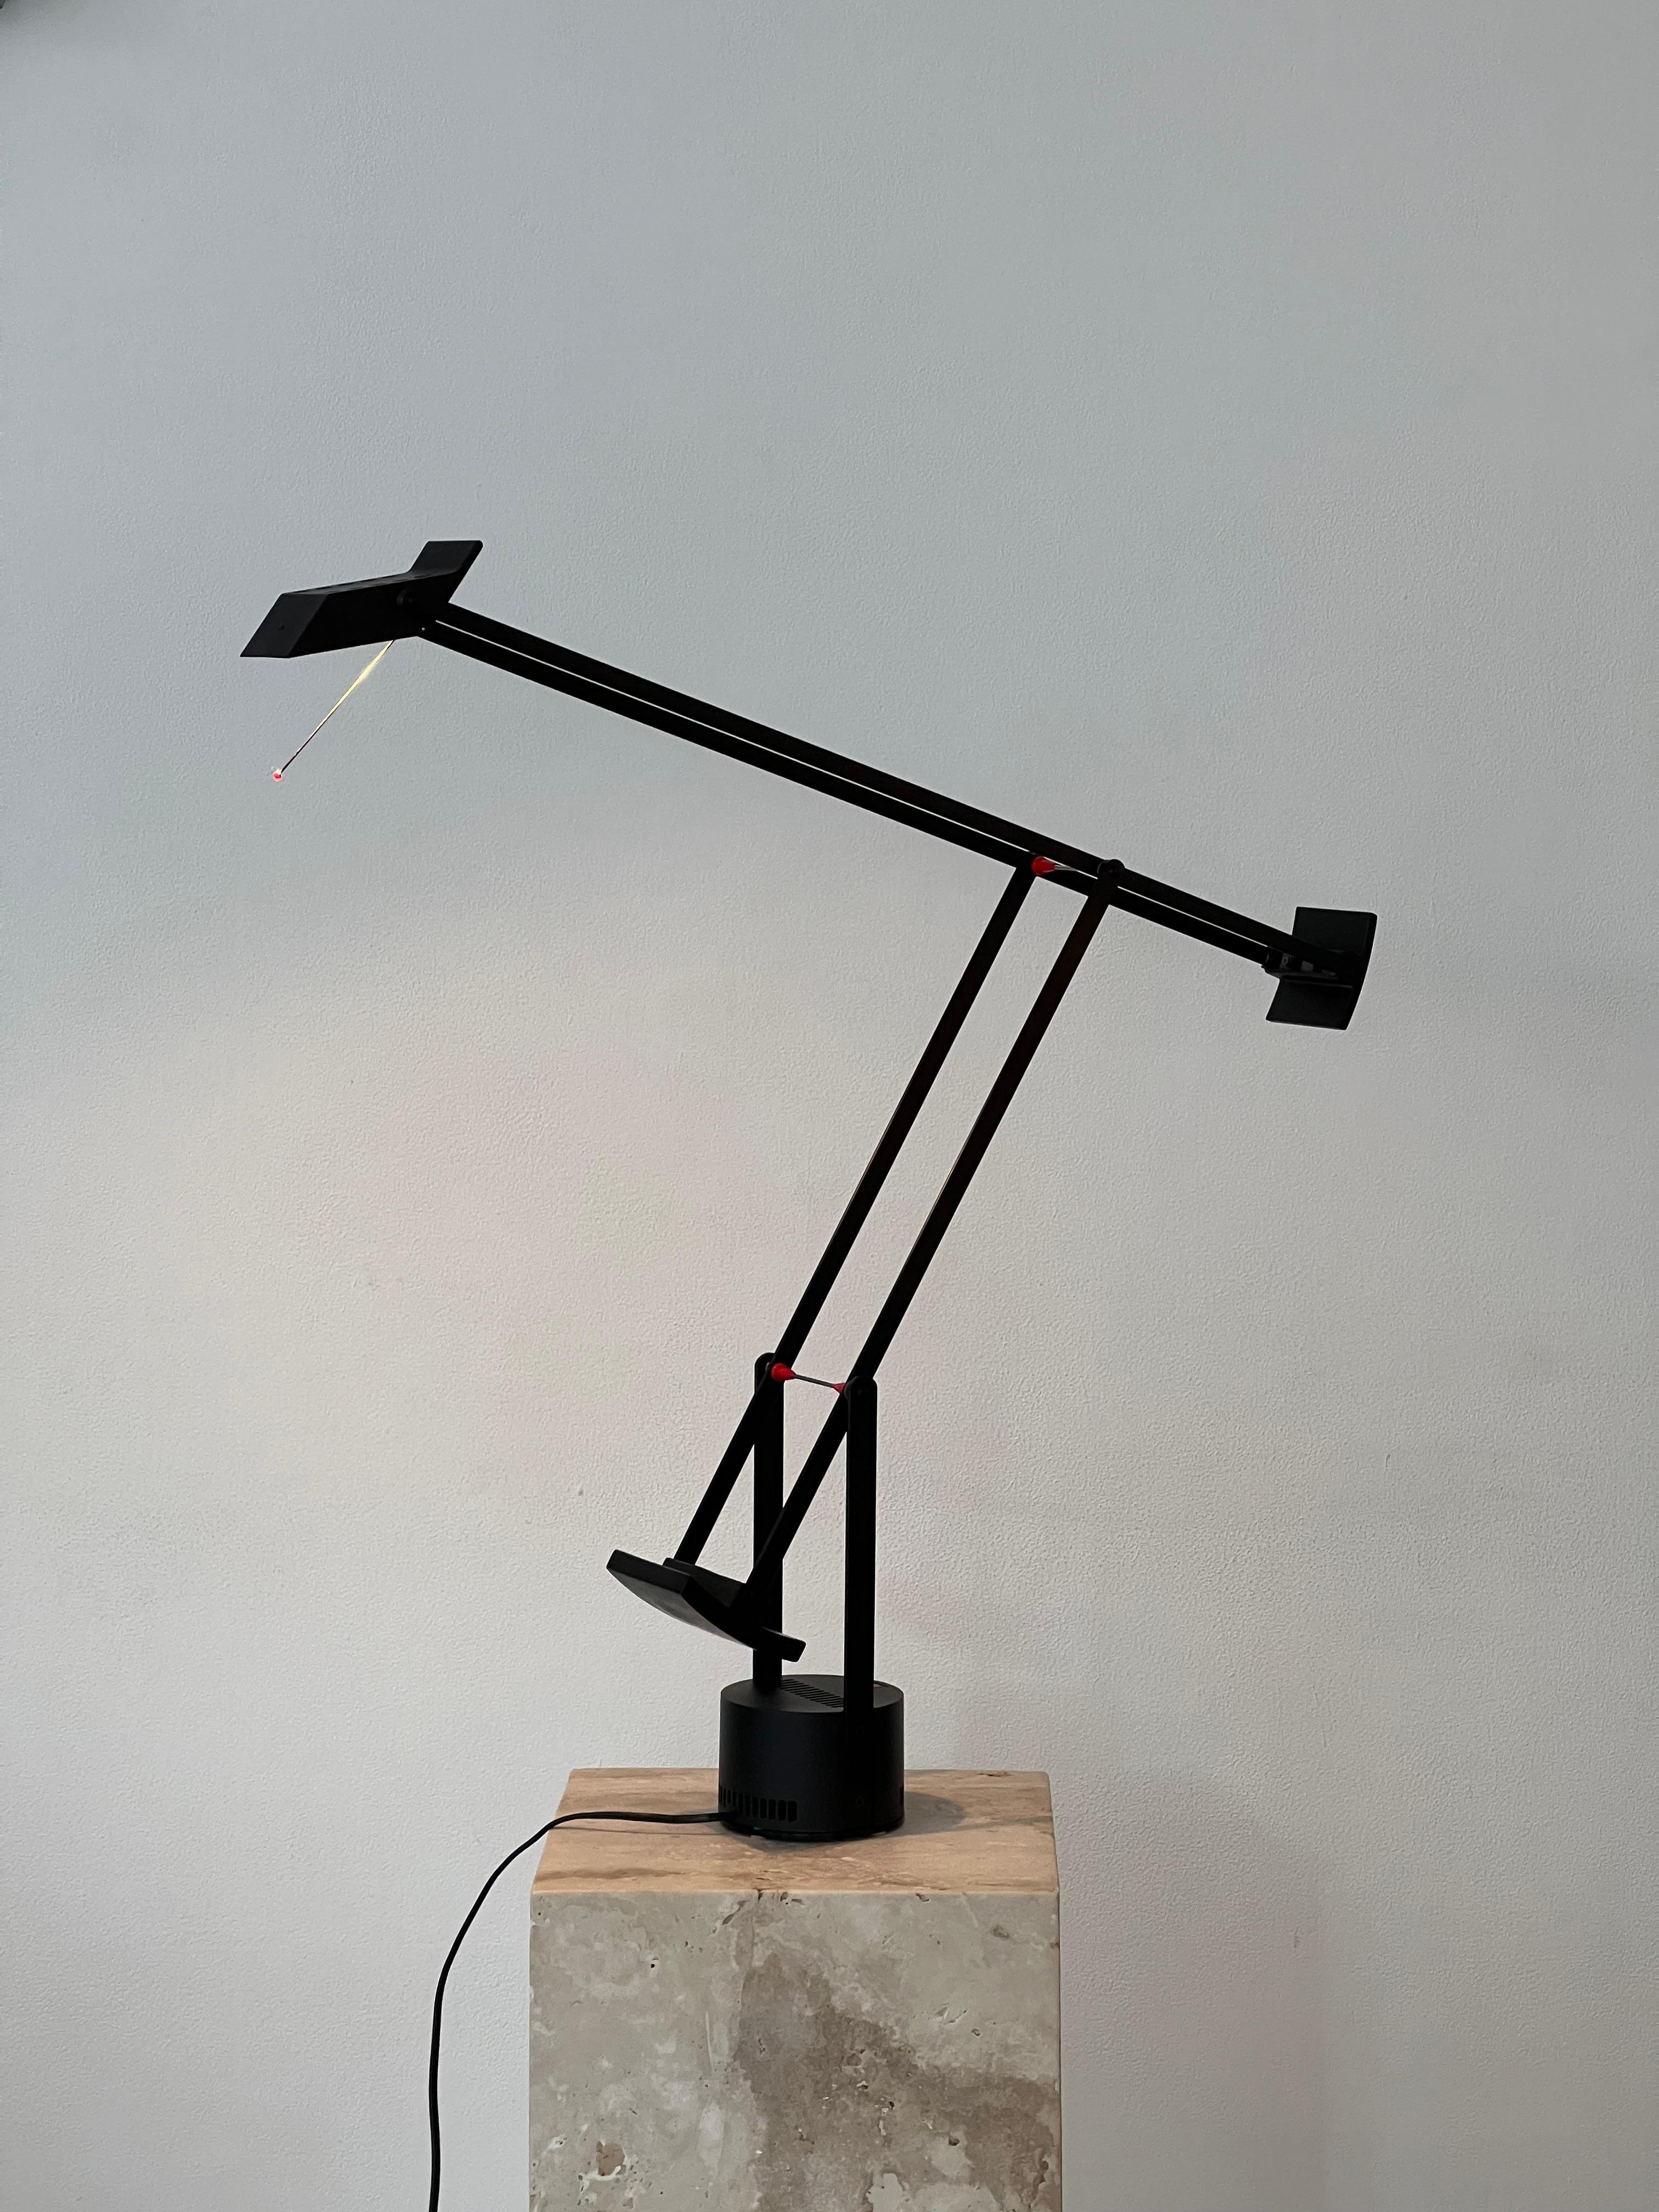 Tizio lamp by Richard Sapper for the Italian publisher Artemide. He created this lamp in 1972, revolutionary for its time as the first lamp to use a halogen bulb, but also for its system of counterweights that perfectly balance the structure,